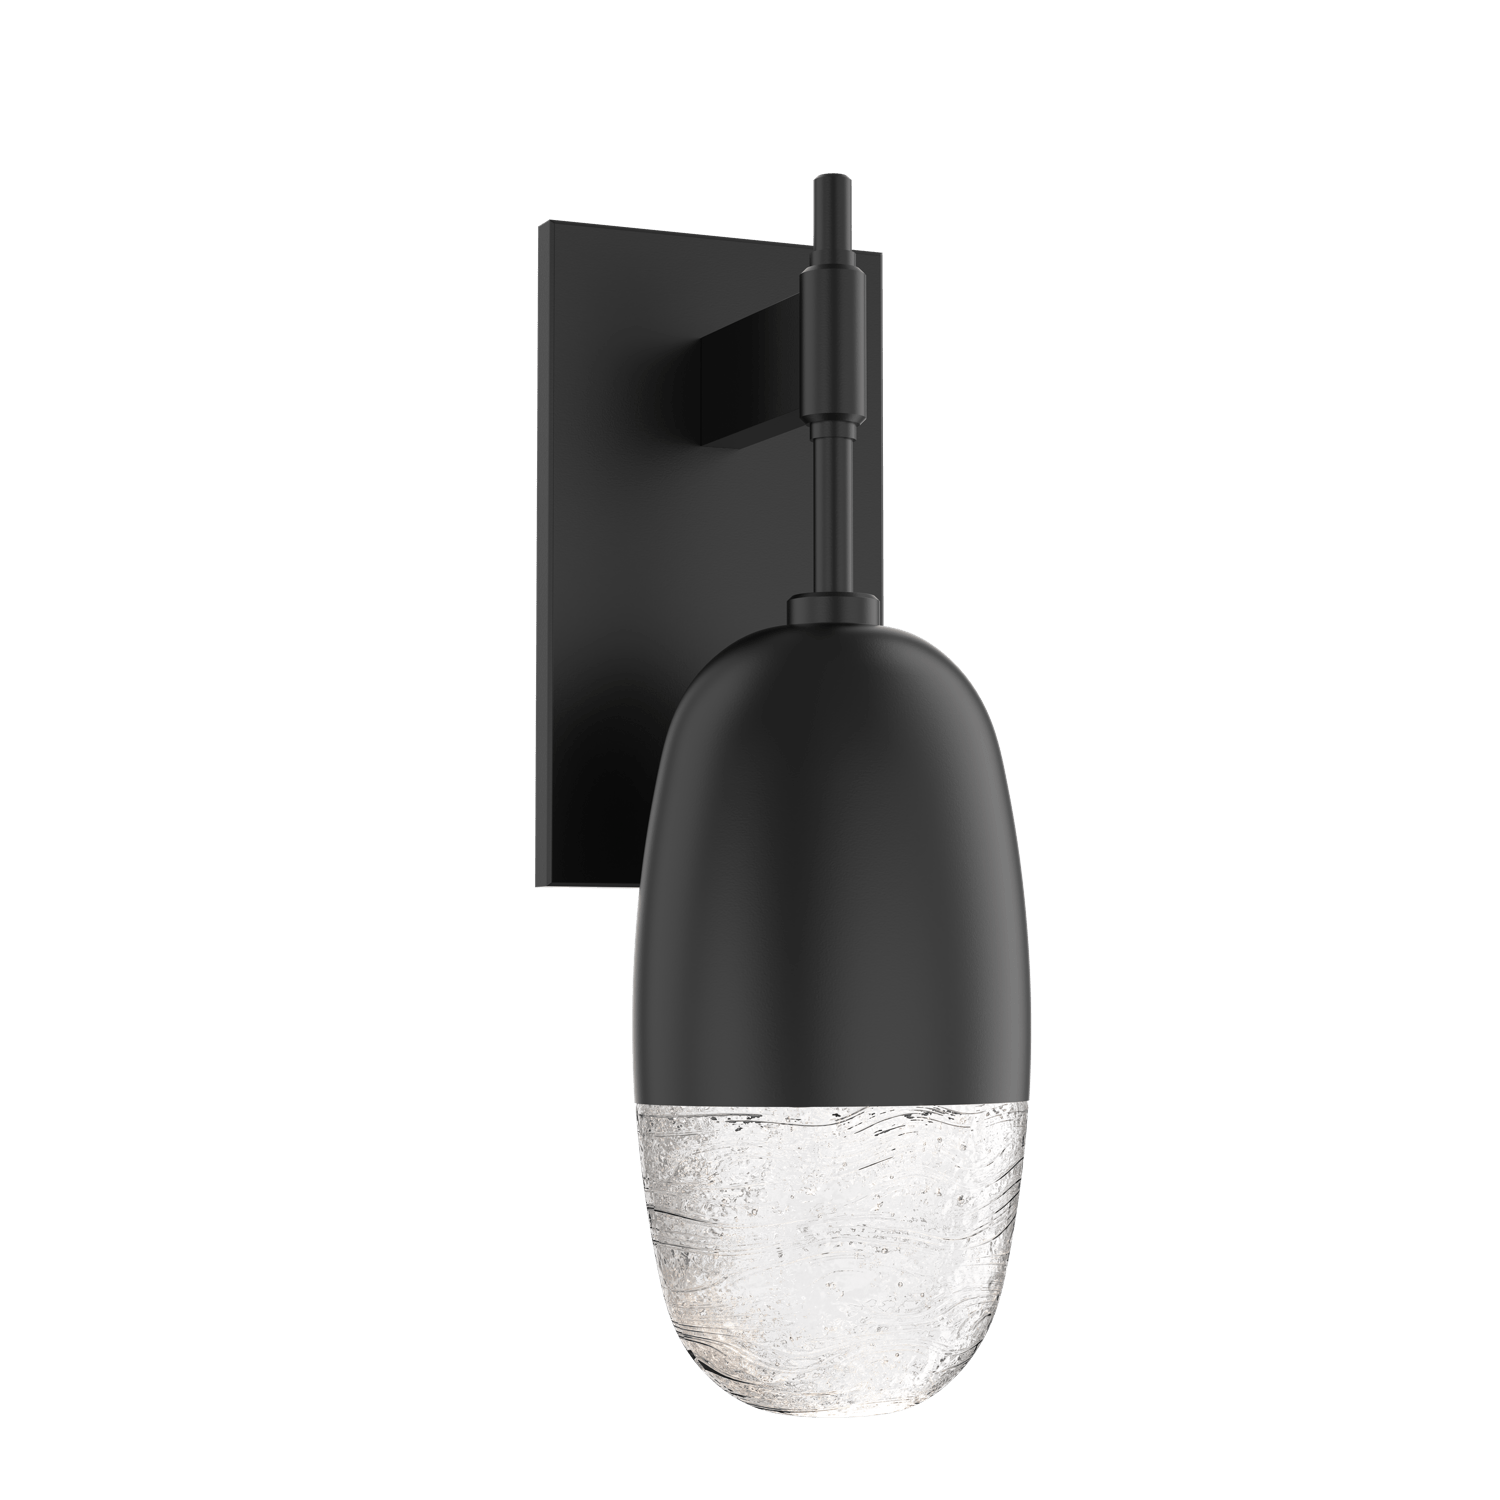 IDB0079-01-MB-Hammerton-Studio-Pebble-wall-sconce-with-matte-black-finish-and-clear-cast-glass-shades-and-LED-lamping